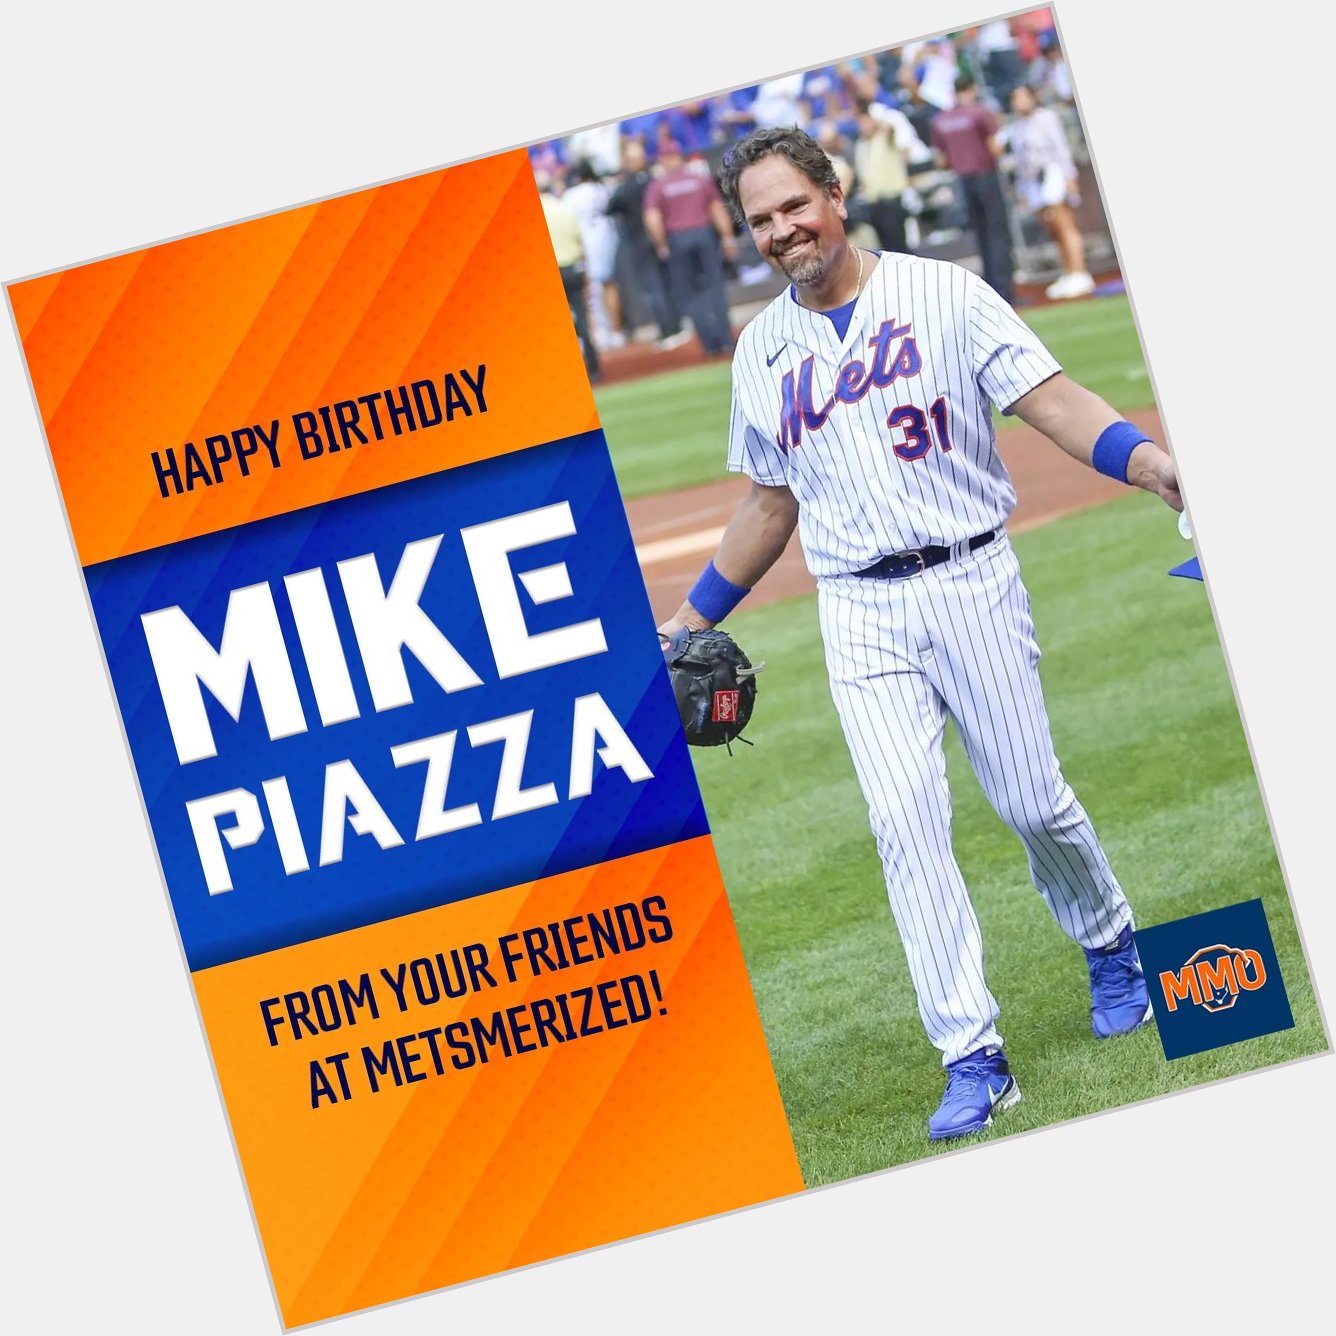 Happy Birthday to one of the greatest Mets of all time, Mike Piazza! 